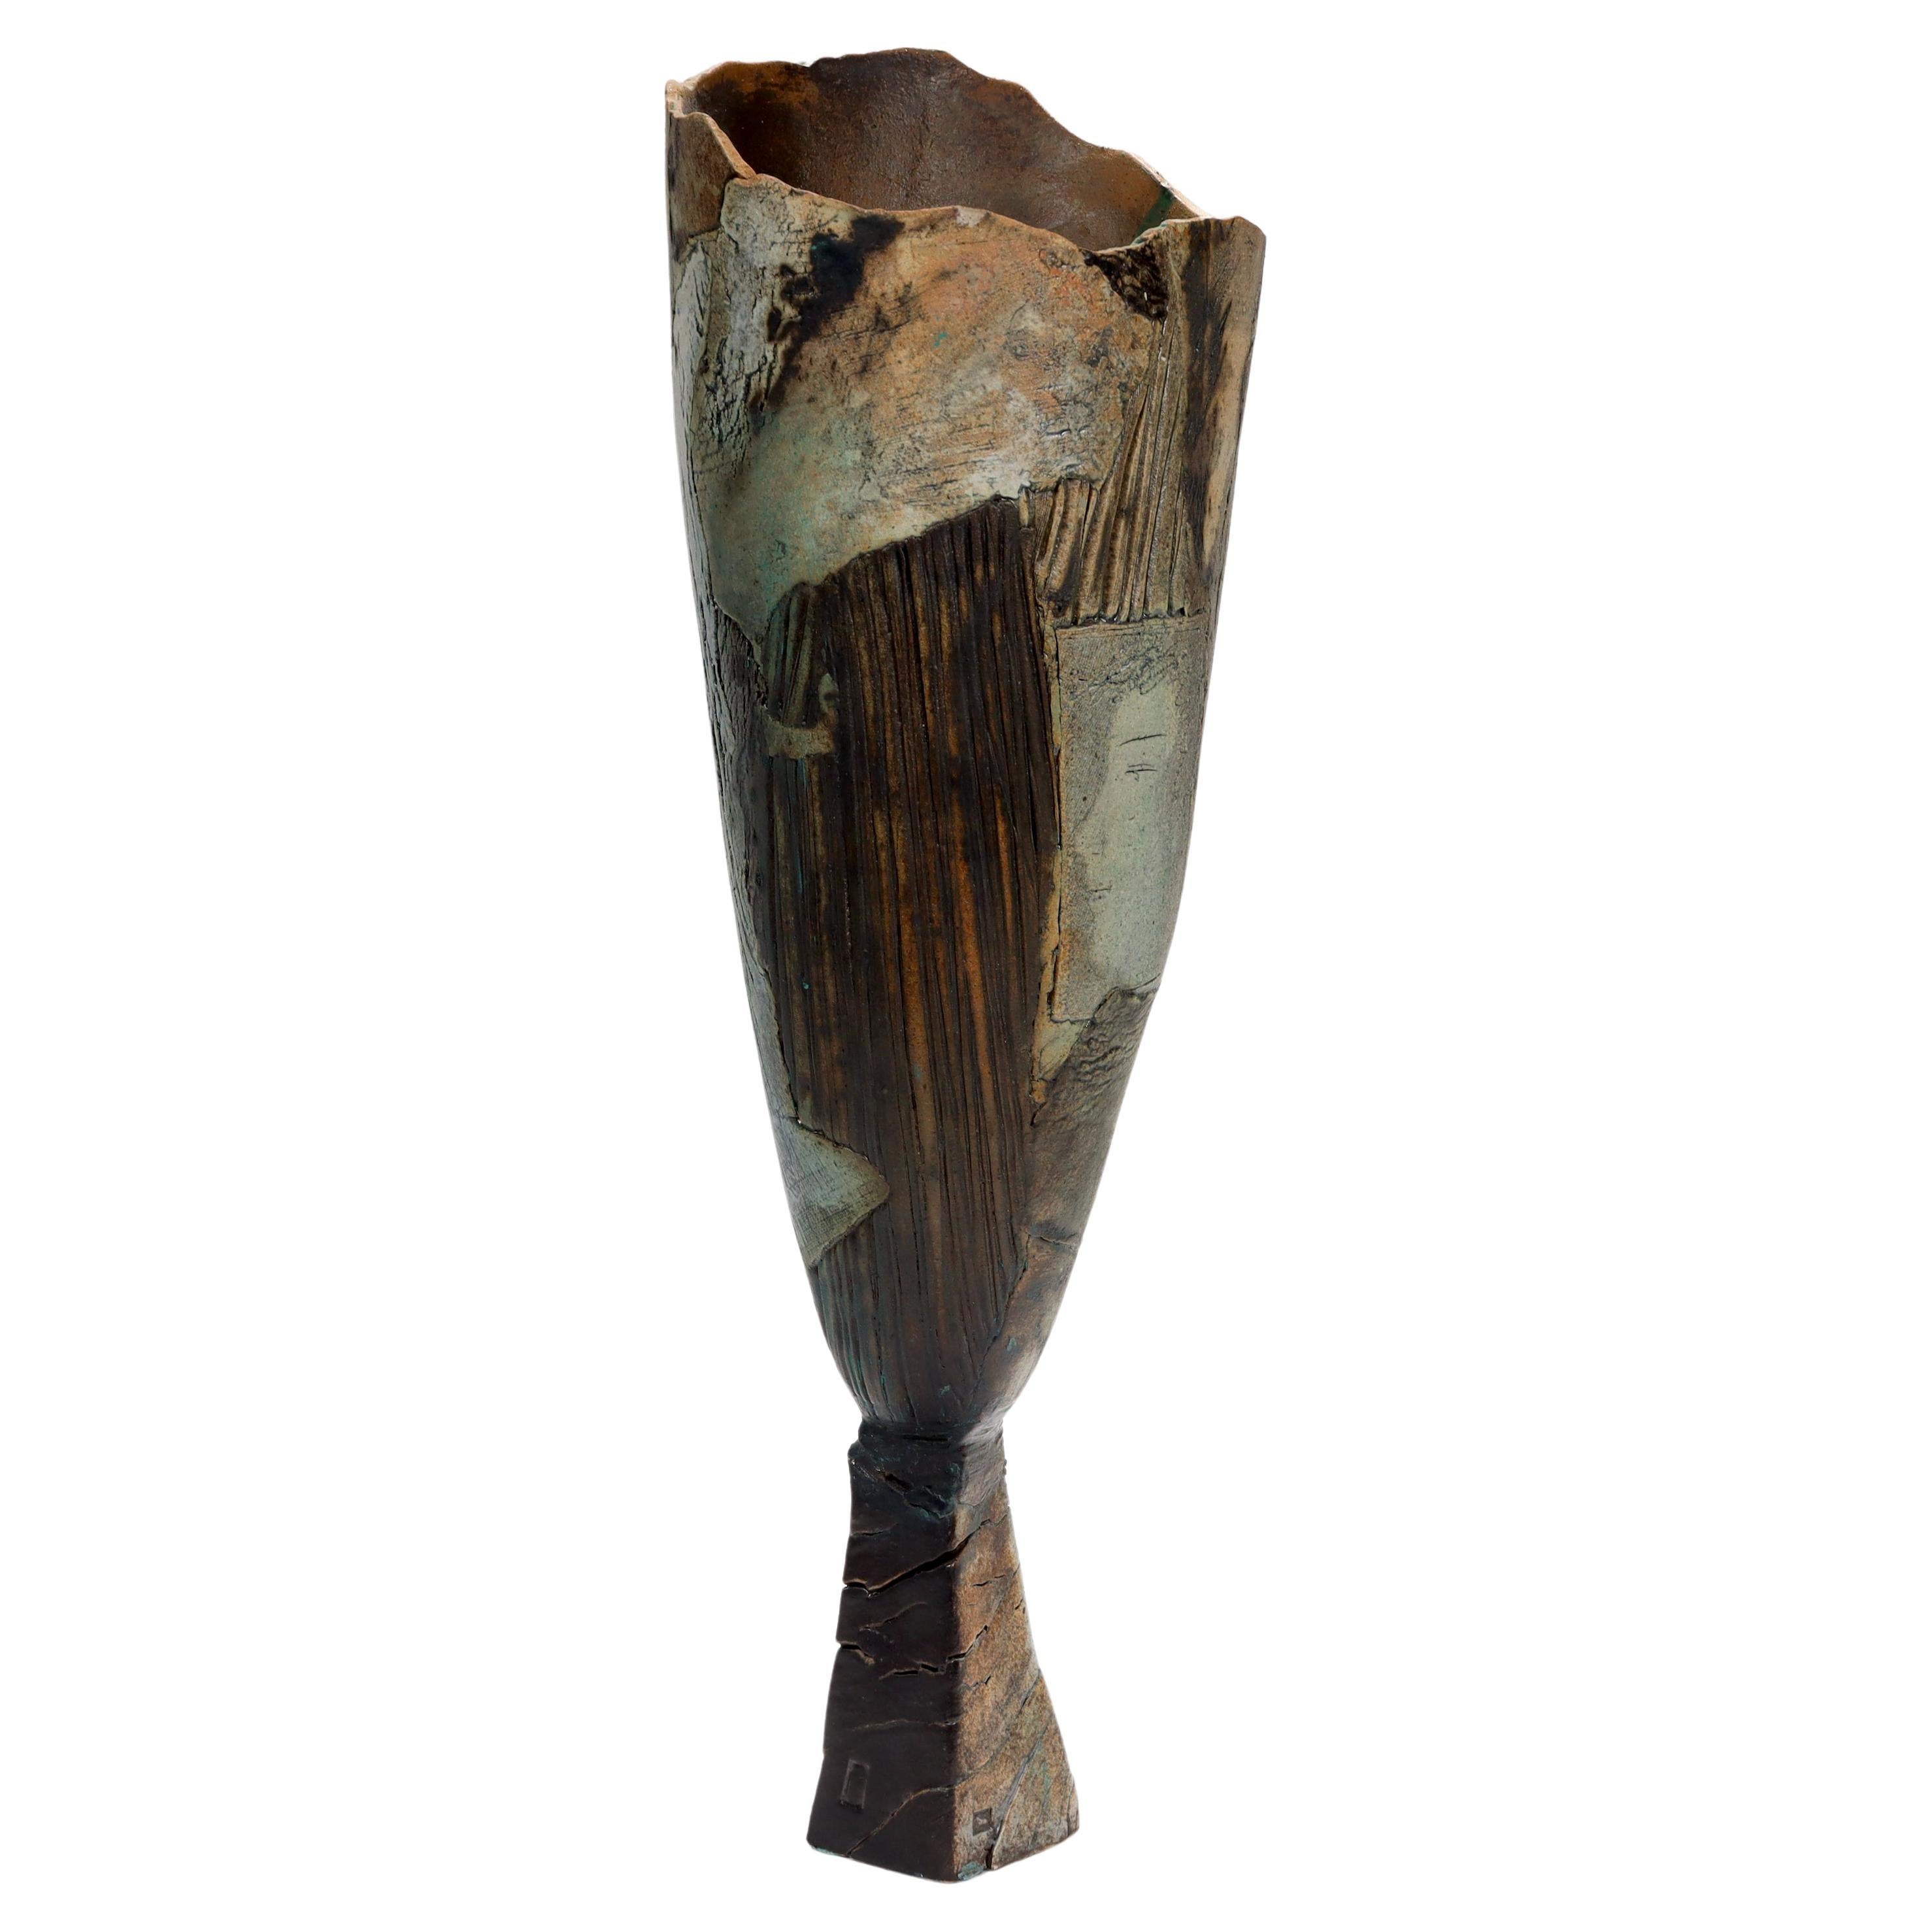 A fine, signed 20th Century studio art pottery vase.

By Rafael Saifulin.

With and elongated, asymmetrical tulip form top supported by a trapezoidal base.

Having a patchwork surface and one section with the profile of a woman's face.

Rafael